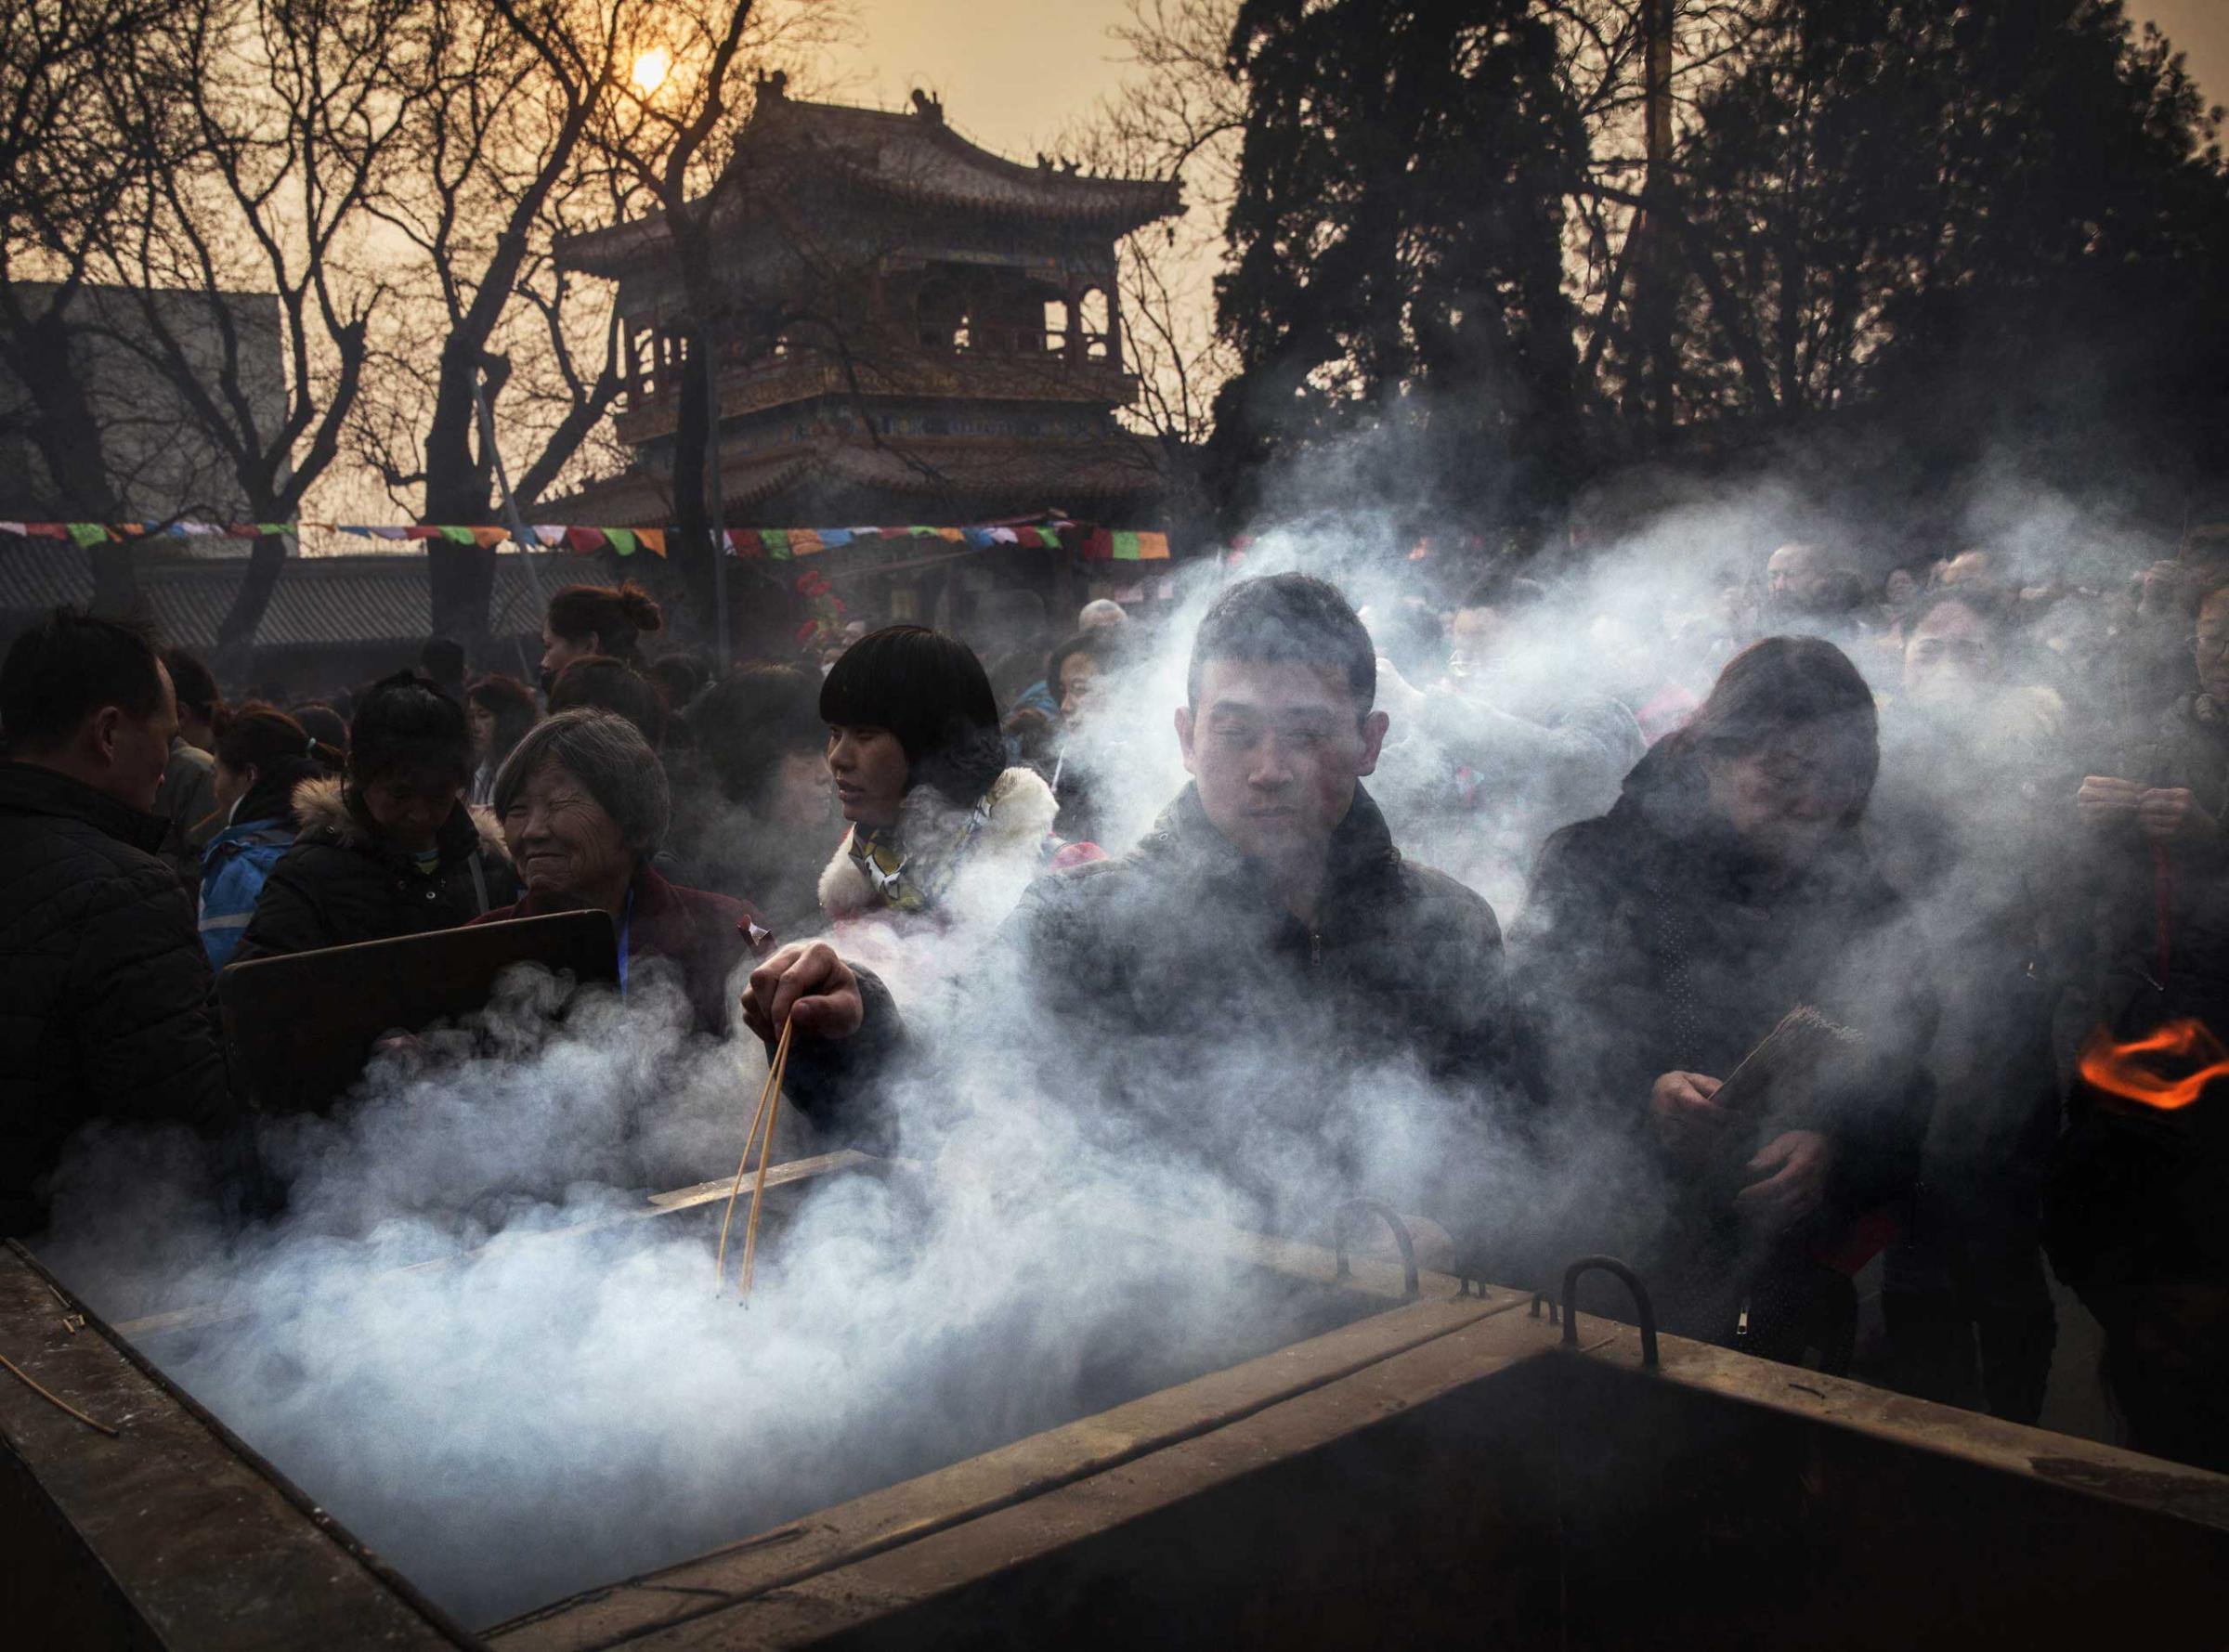 A Chinese man is shrouded in smoke from incense as he lights a stick while praying with others at the Yonghegong Lama Temple during celebrations for the Lunar New Year Feb. 19, 2015 in Beijing.